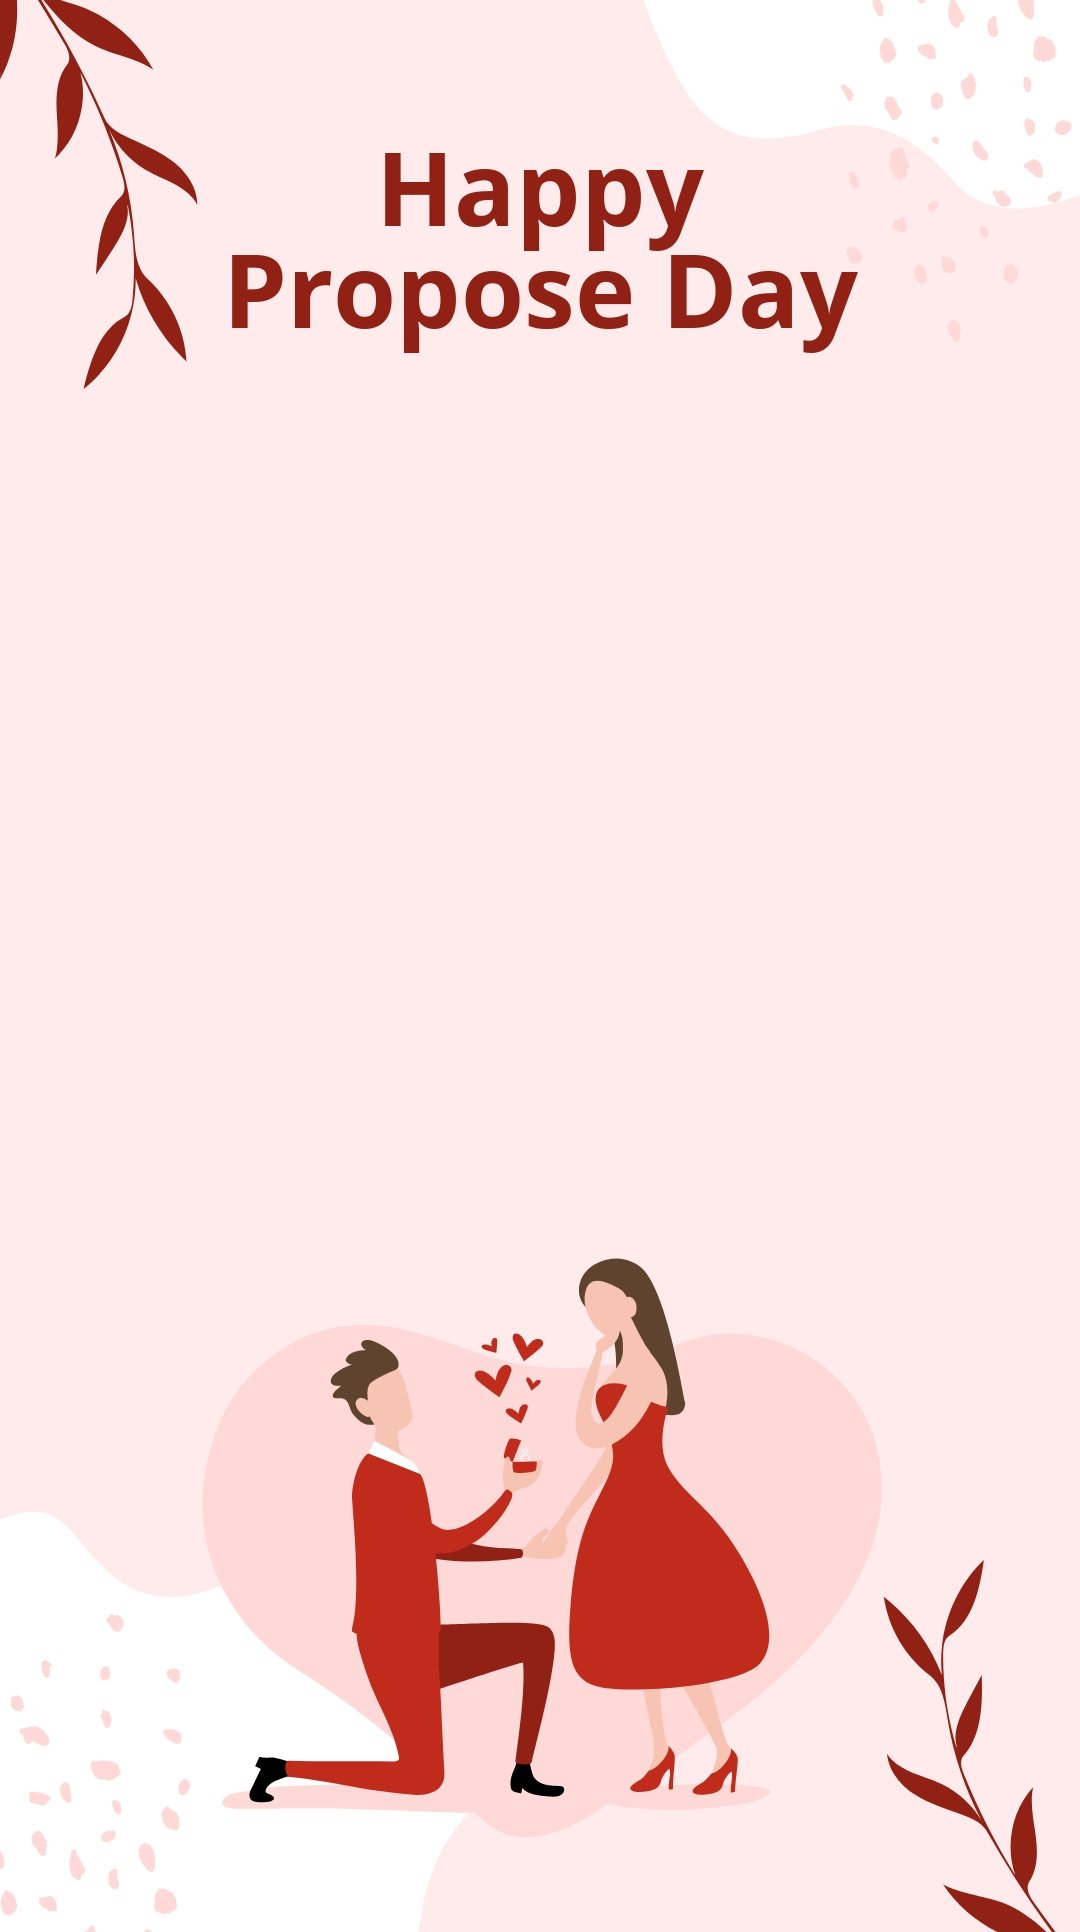 Happy Propose Day Snapchat Geofilter Template